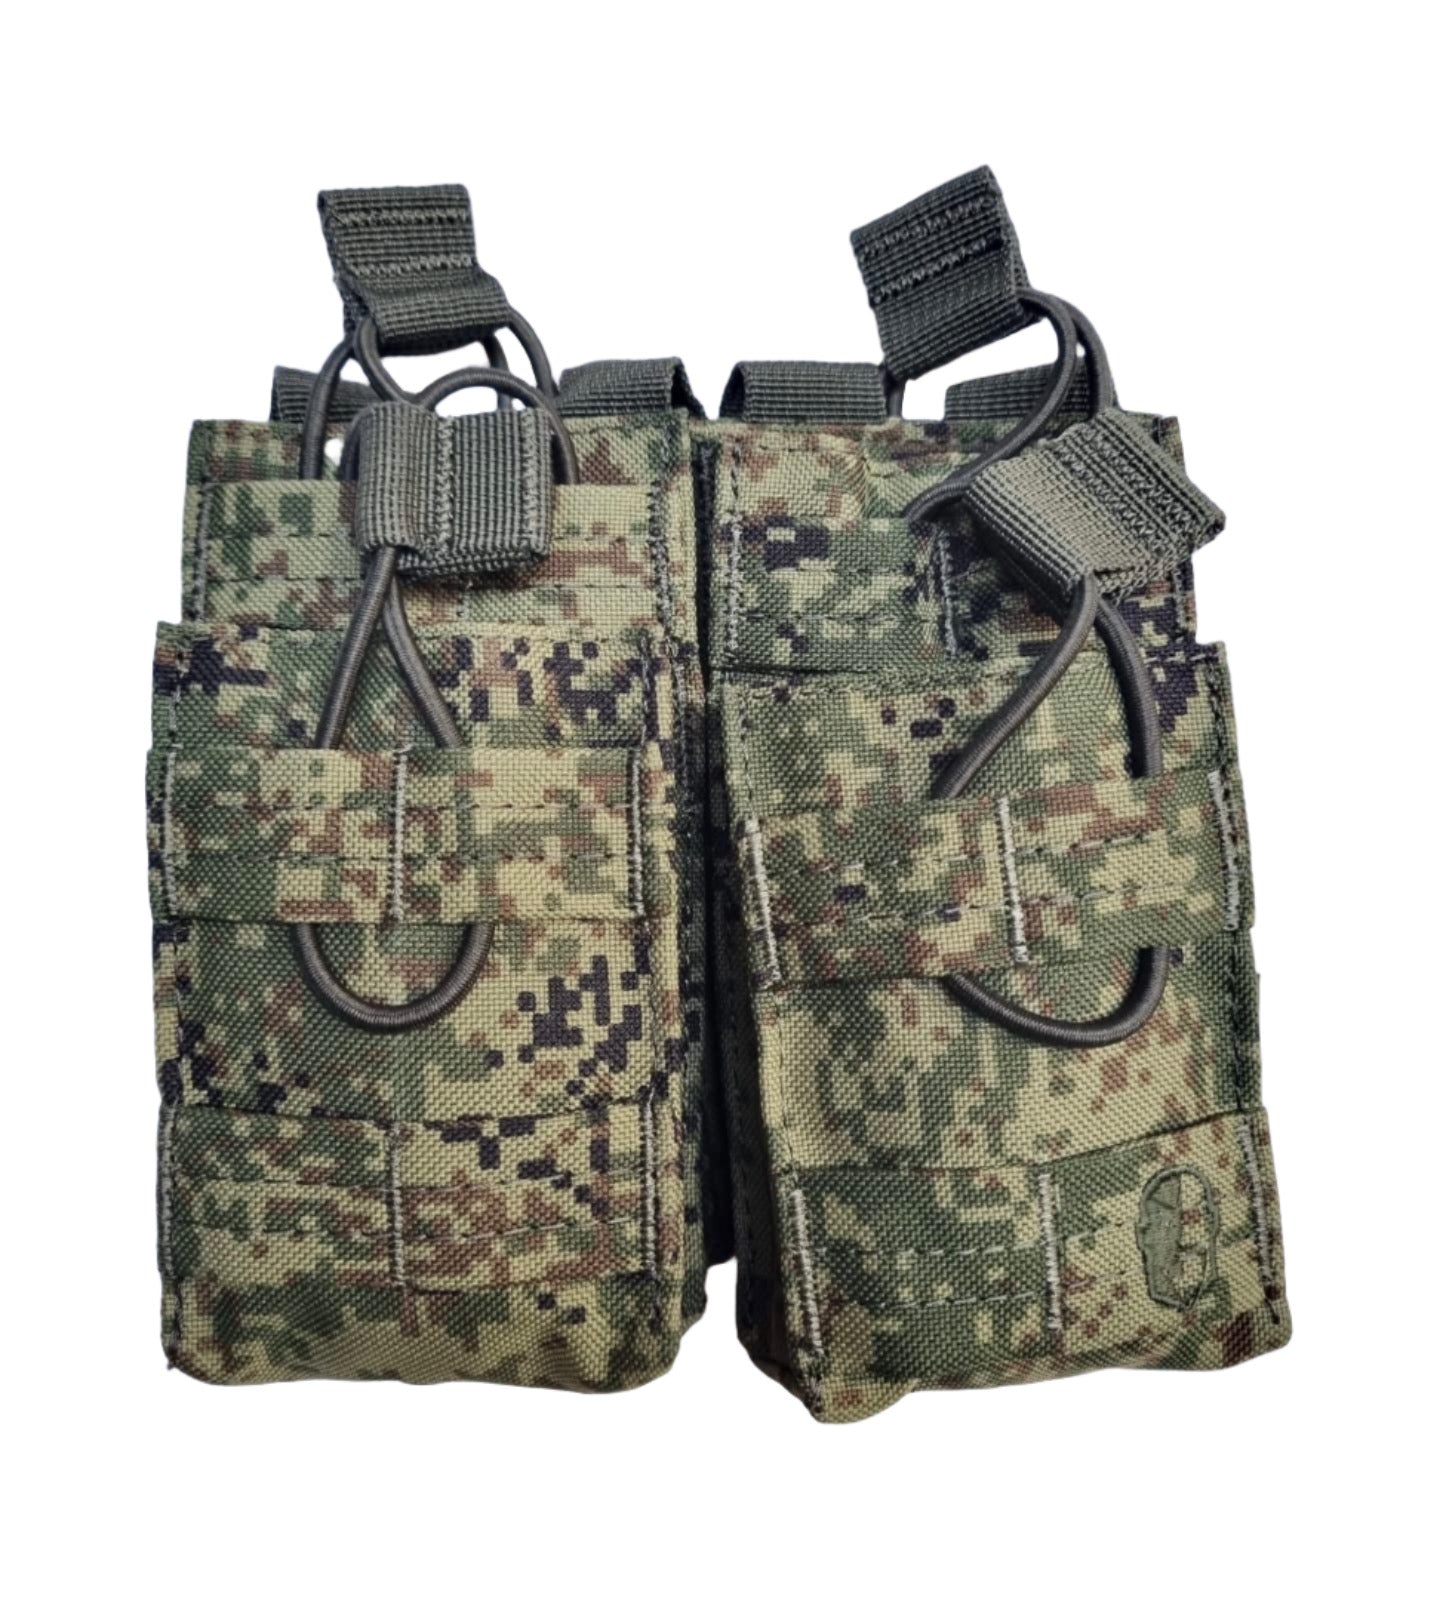 SHS - 996 STACKER OPEN-TOP MAG POUCH DOUBLE COLOUR RUSSIAN DIGITAL.